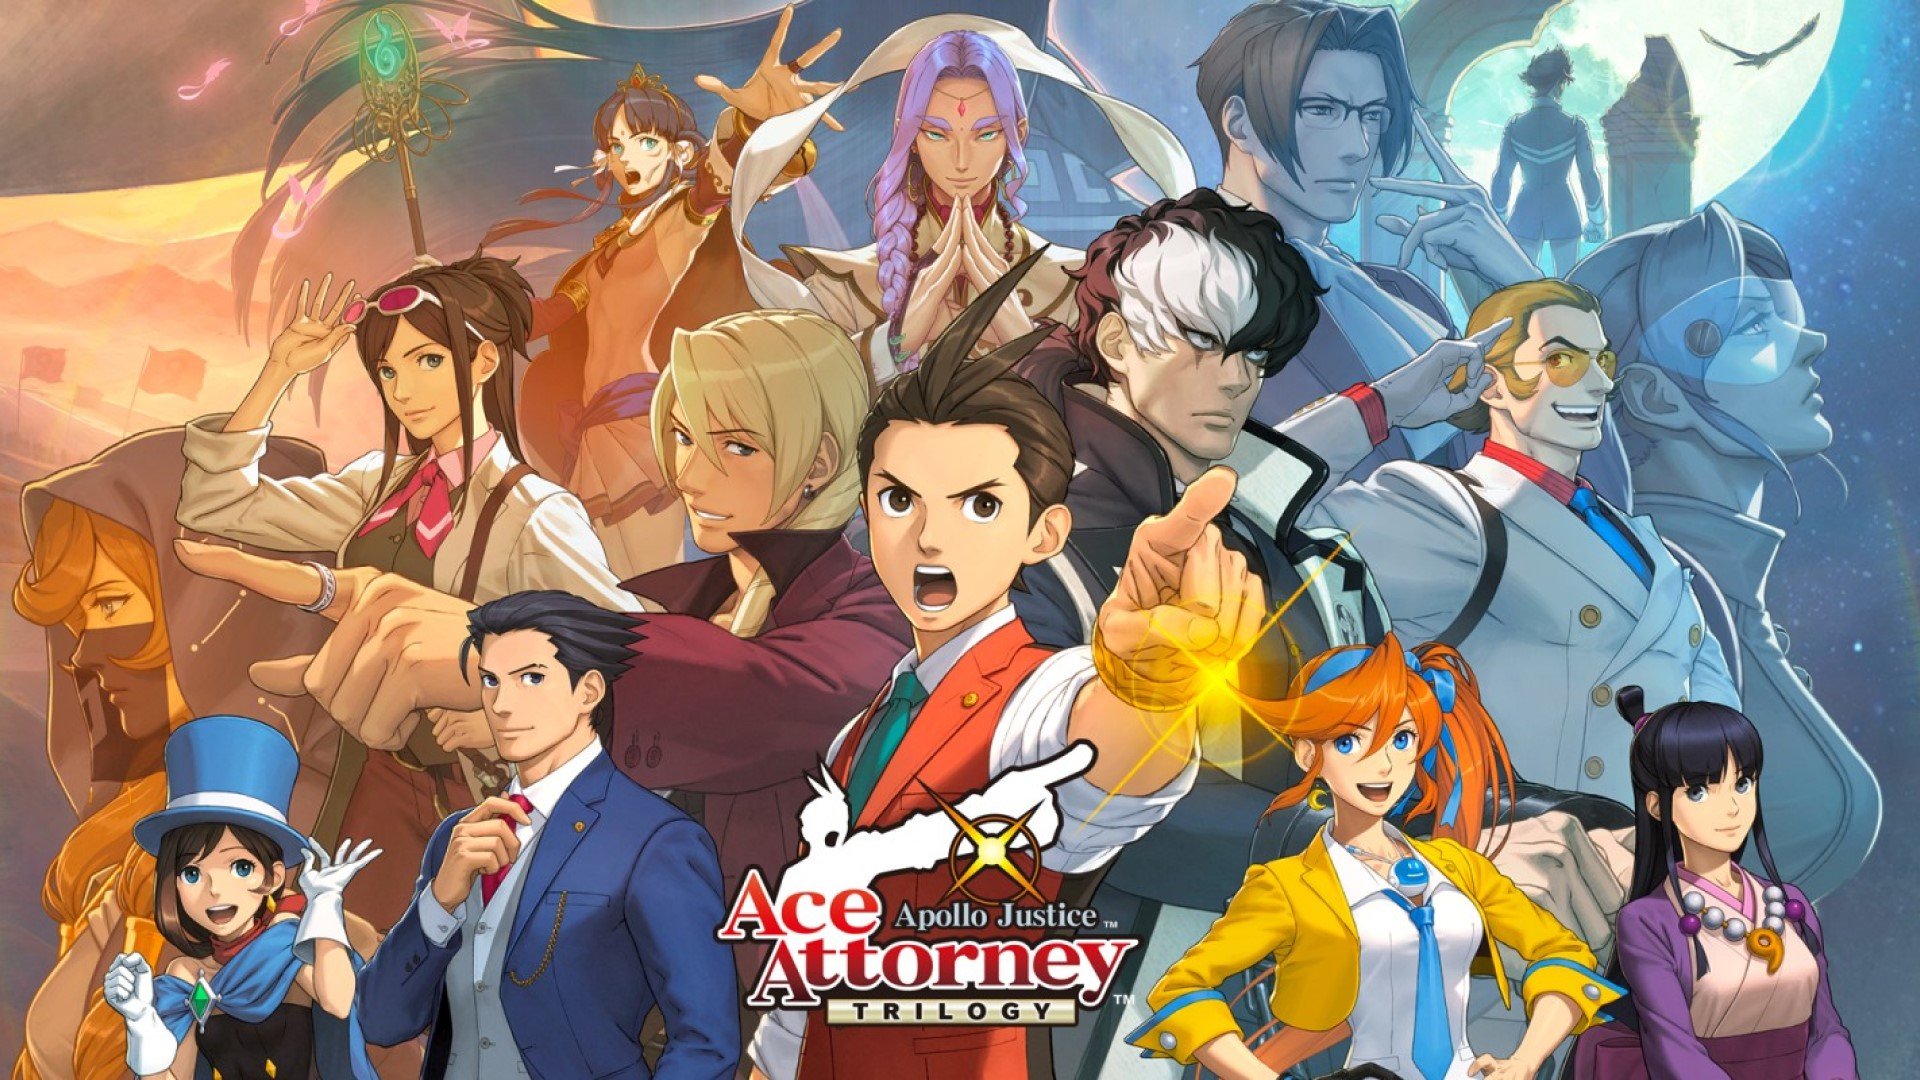 Key art from Apollo Justice: Ace Attorney Trilogy, showing many of the main characters from the game.